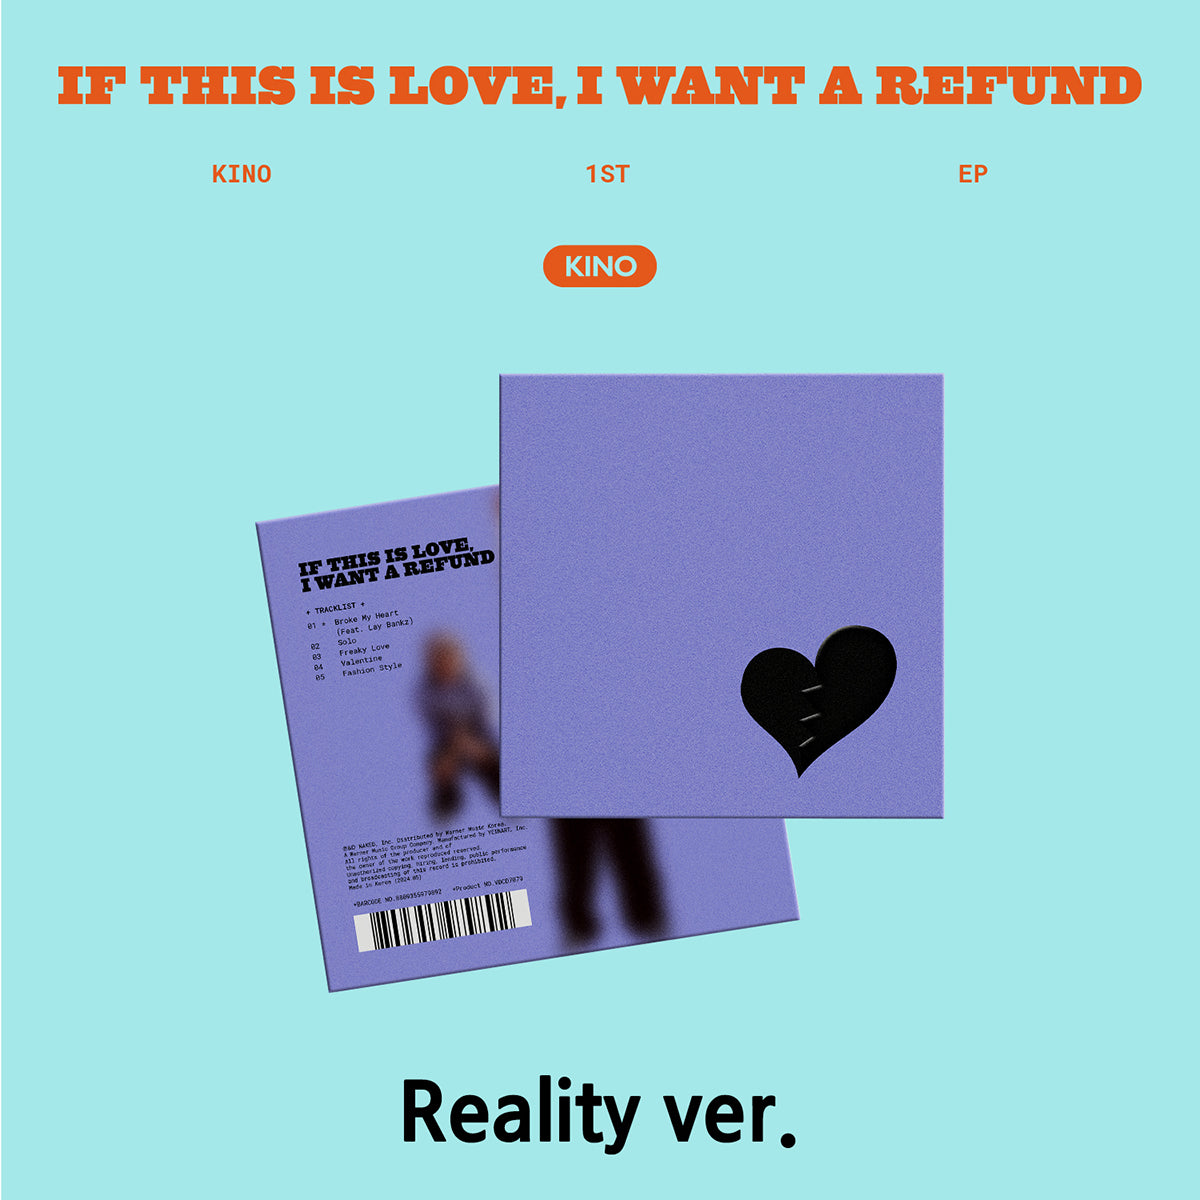 KINO - If this is love, I want a refund [PRE-ORDER]